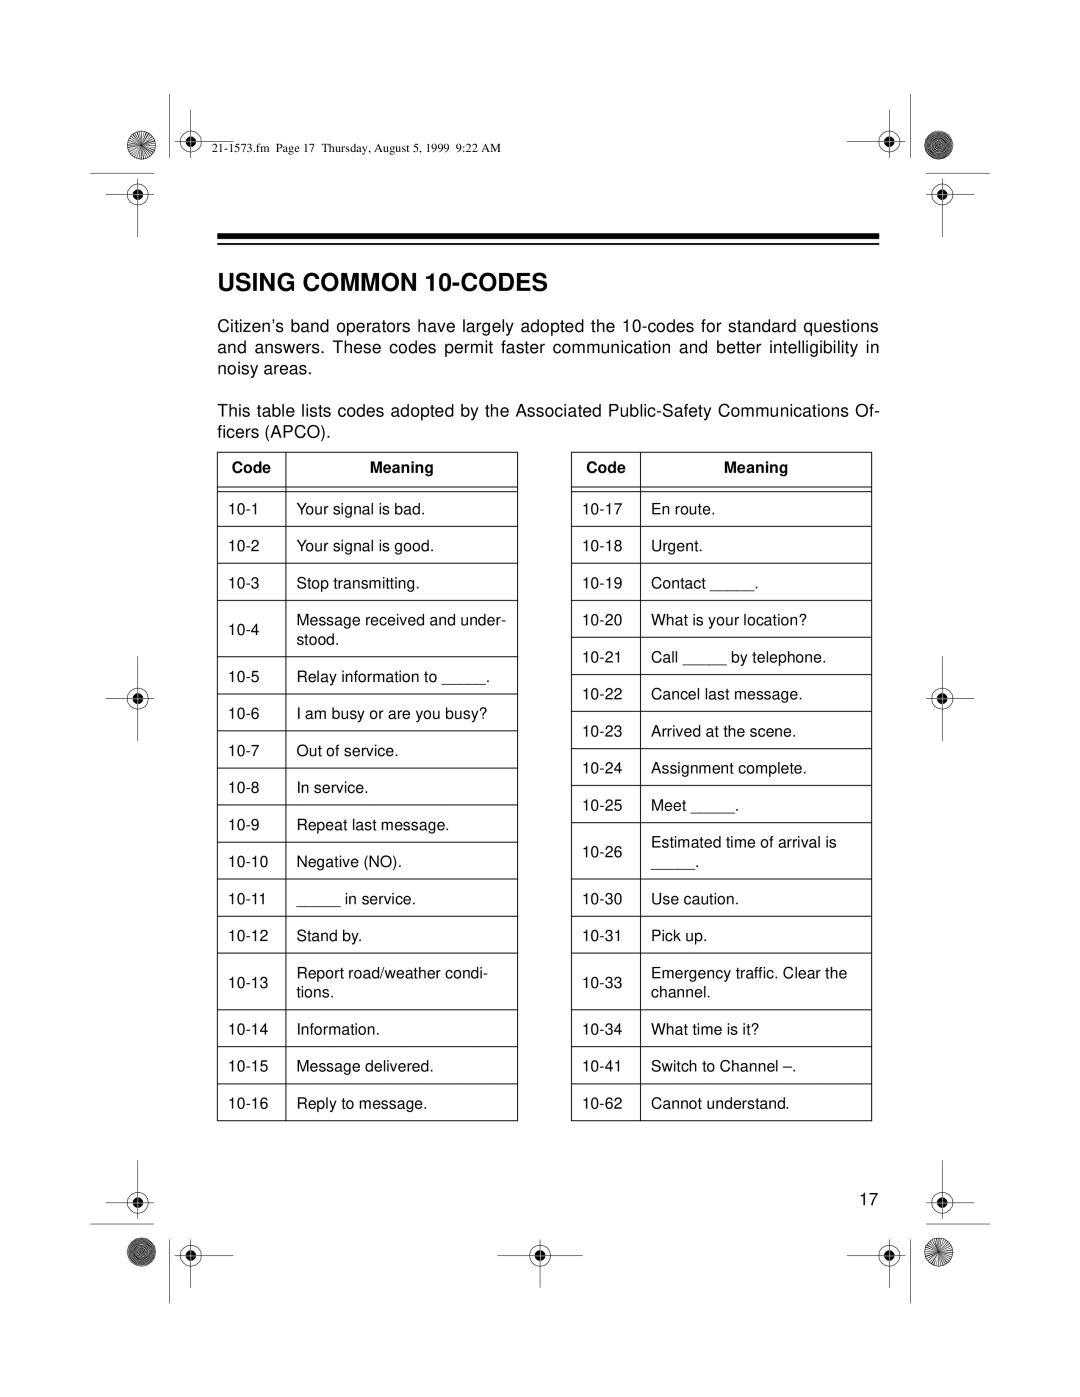 Samsung TRC-445 owner manual USING COMMON 10-CODES 